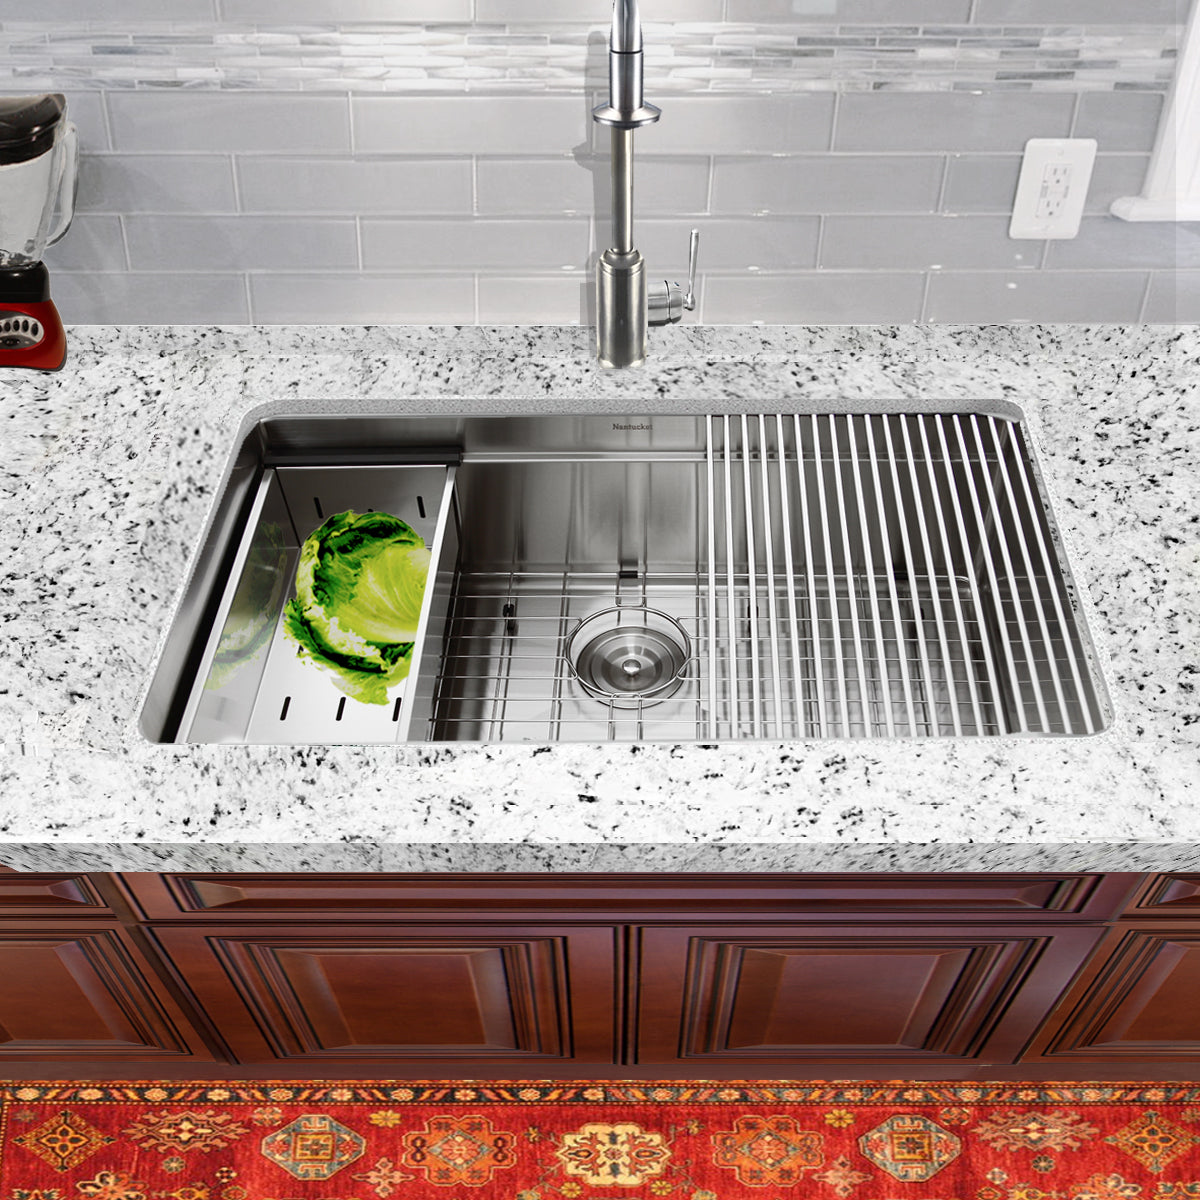 Nantucket Sinks' SR-PS-3220-16 - 32 Inch Professional Prep Station Small Radius Undermount Stainless  Kitchen Sink with Accessories